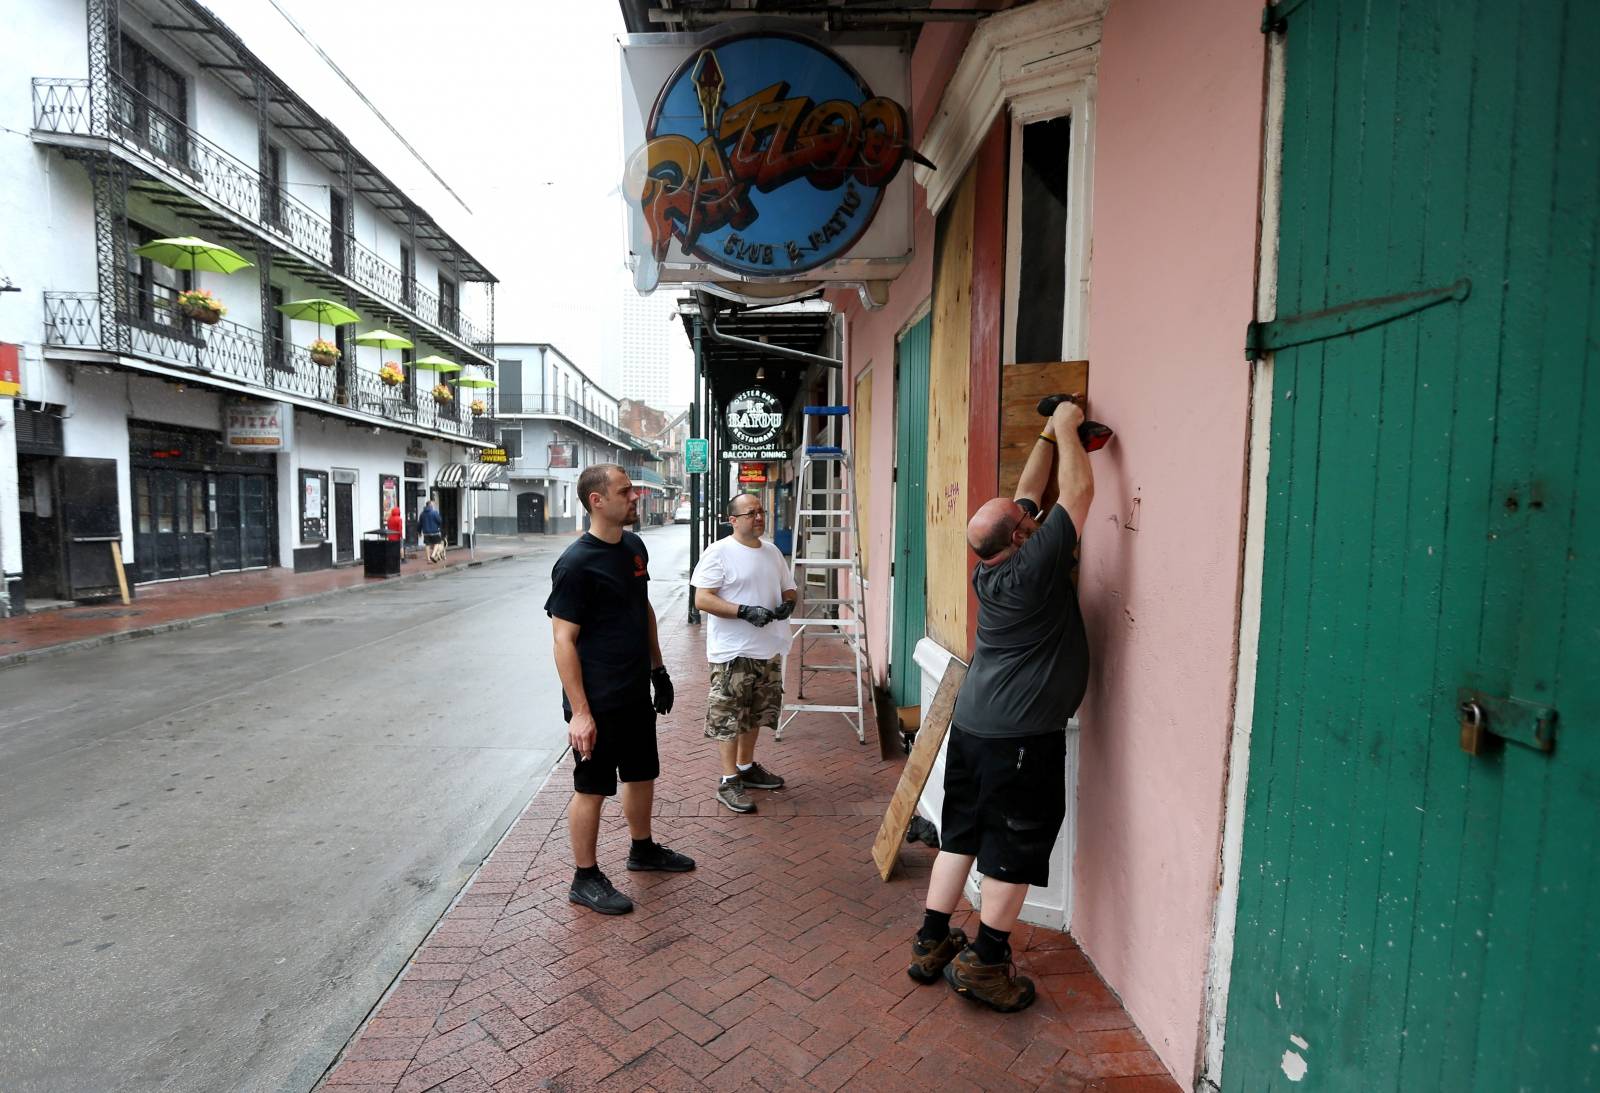 Employees board up a business on Bourbon St. as Tropical Storm Barry approaches land in New Orleans